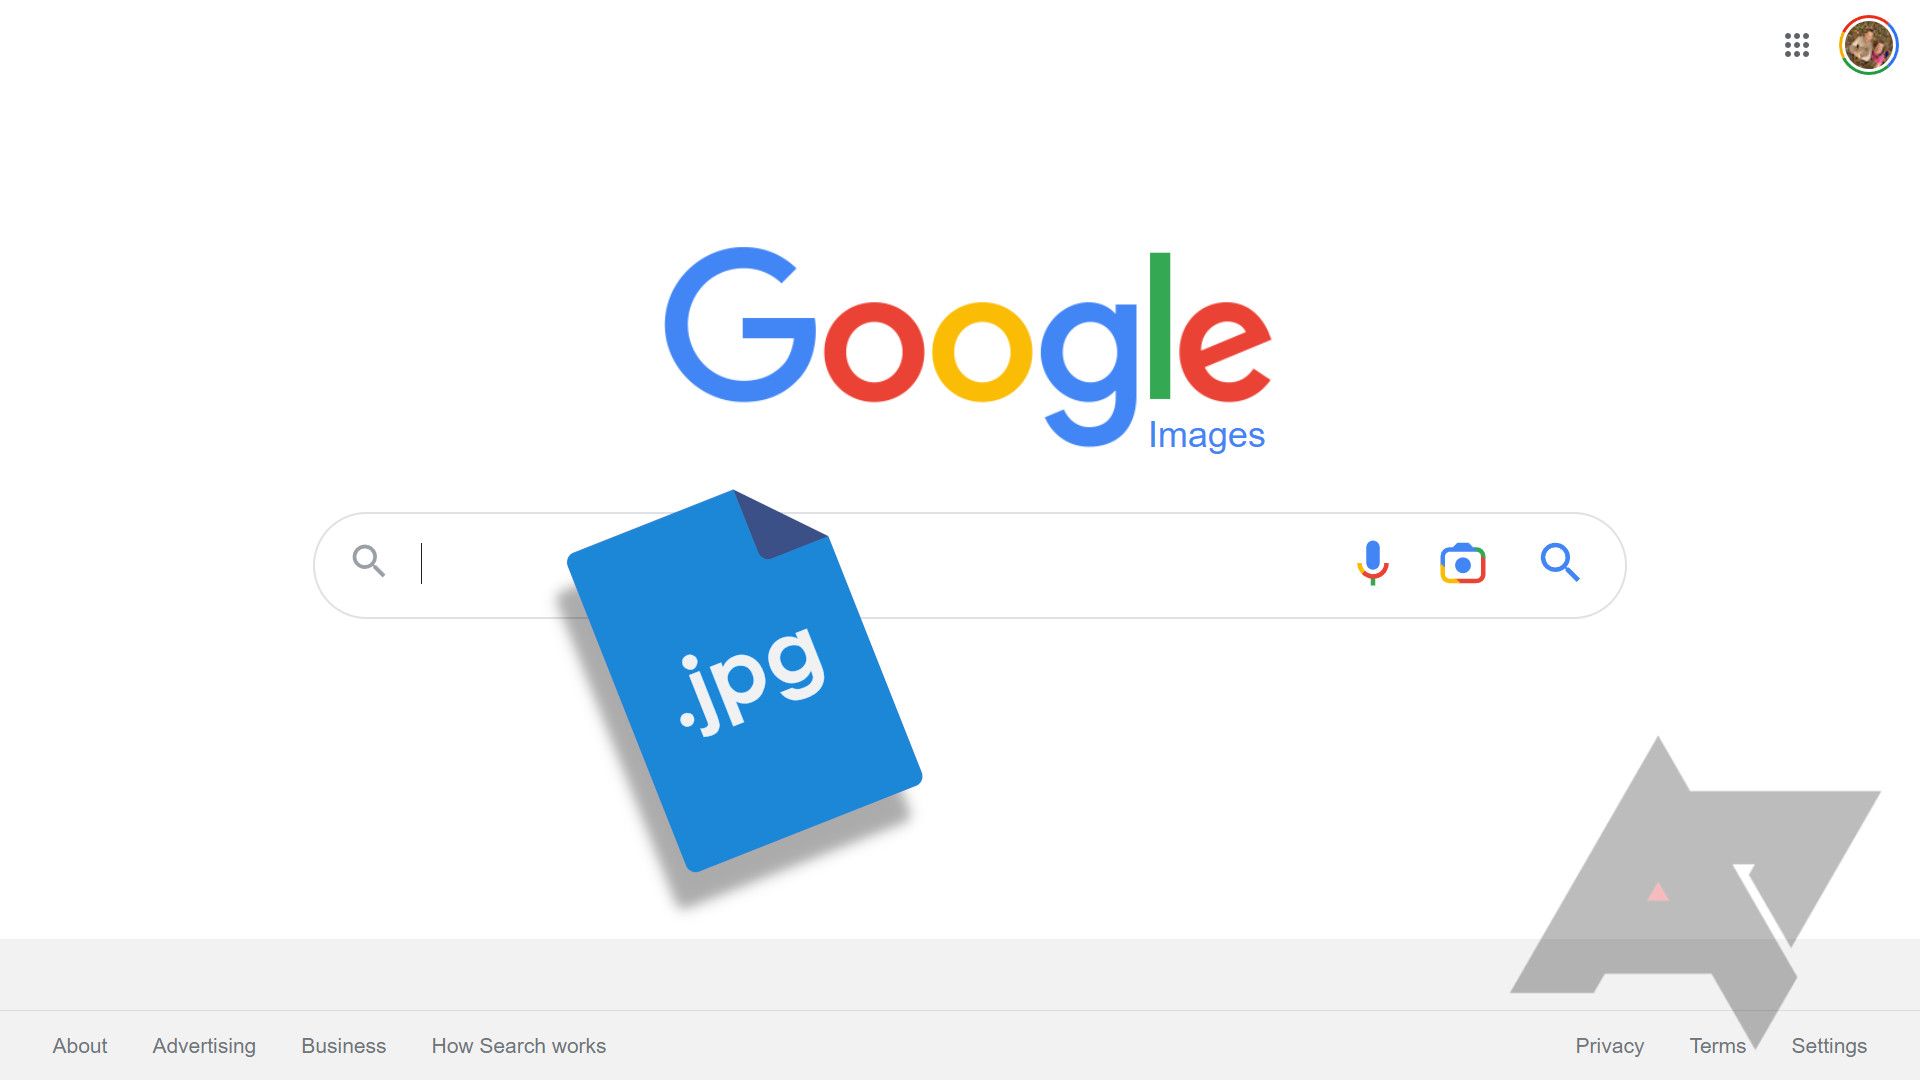 The Google Images page is shown with a JPEG file icon hovering over it.